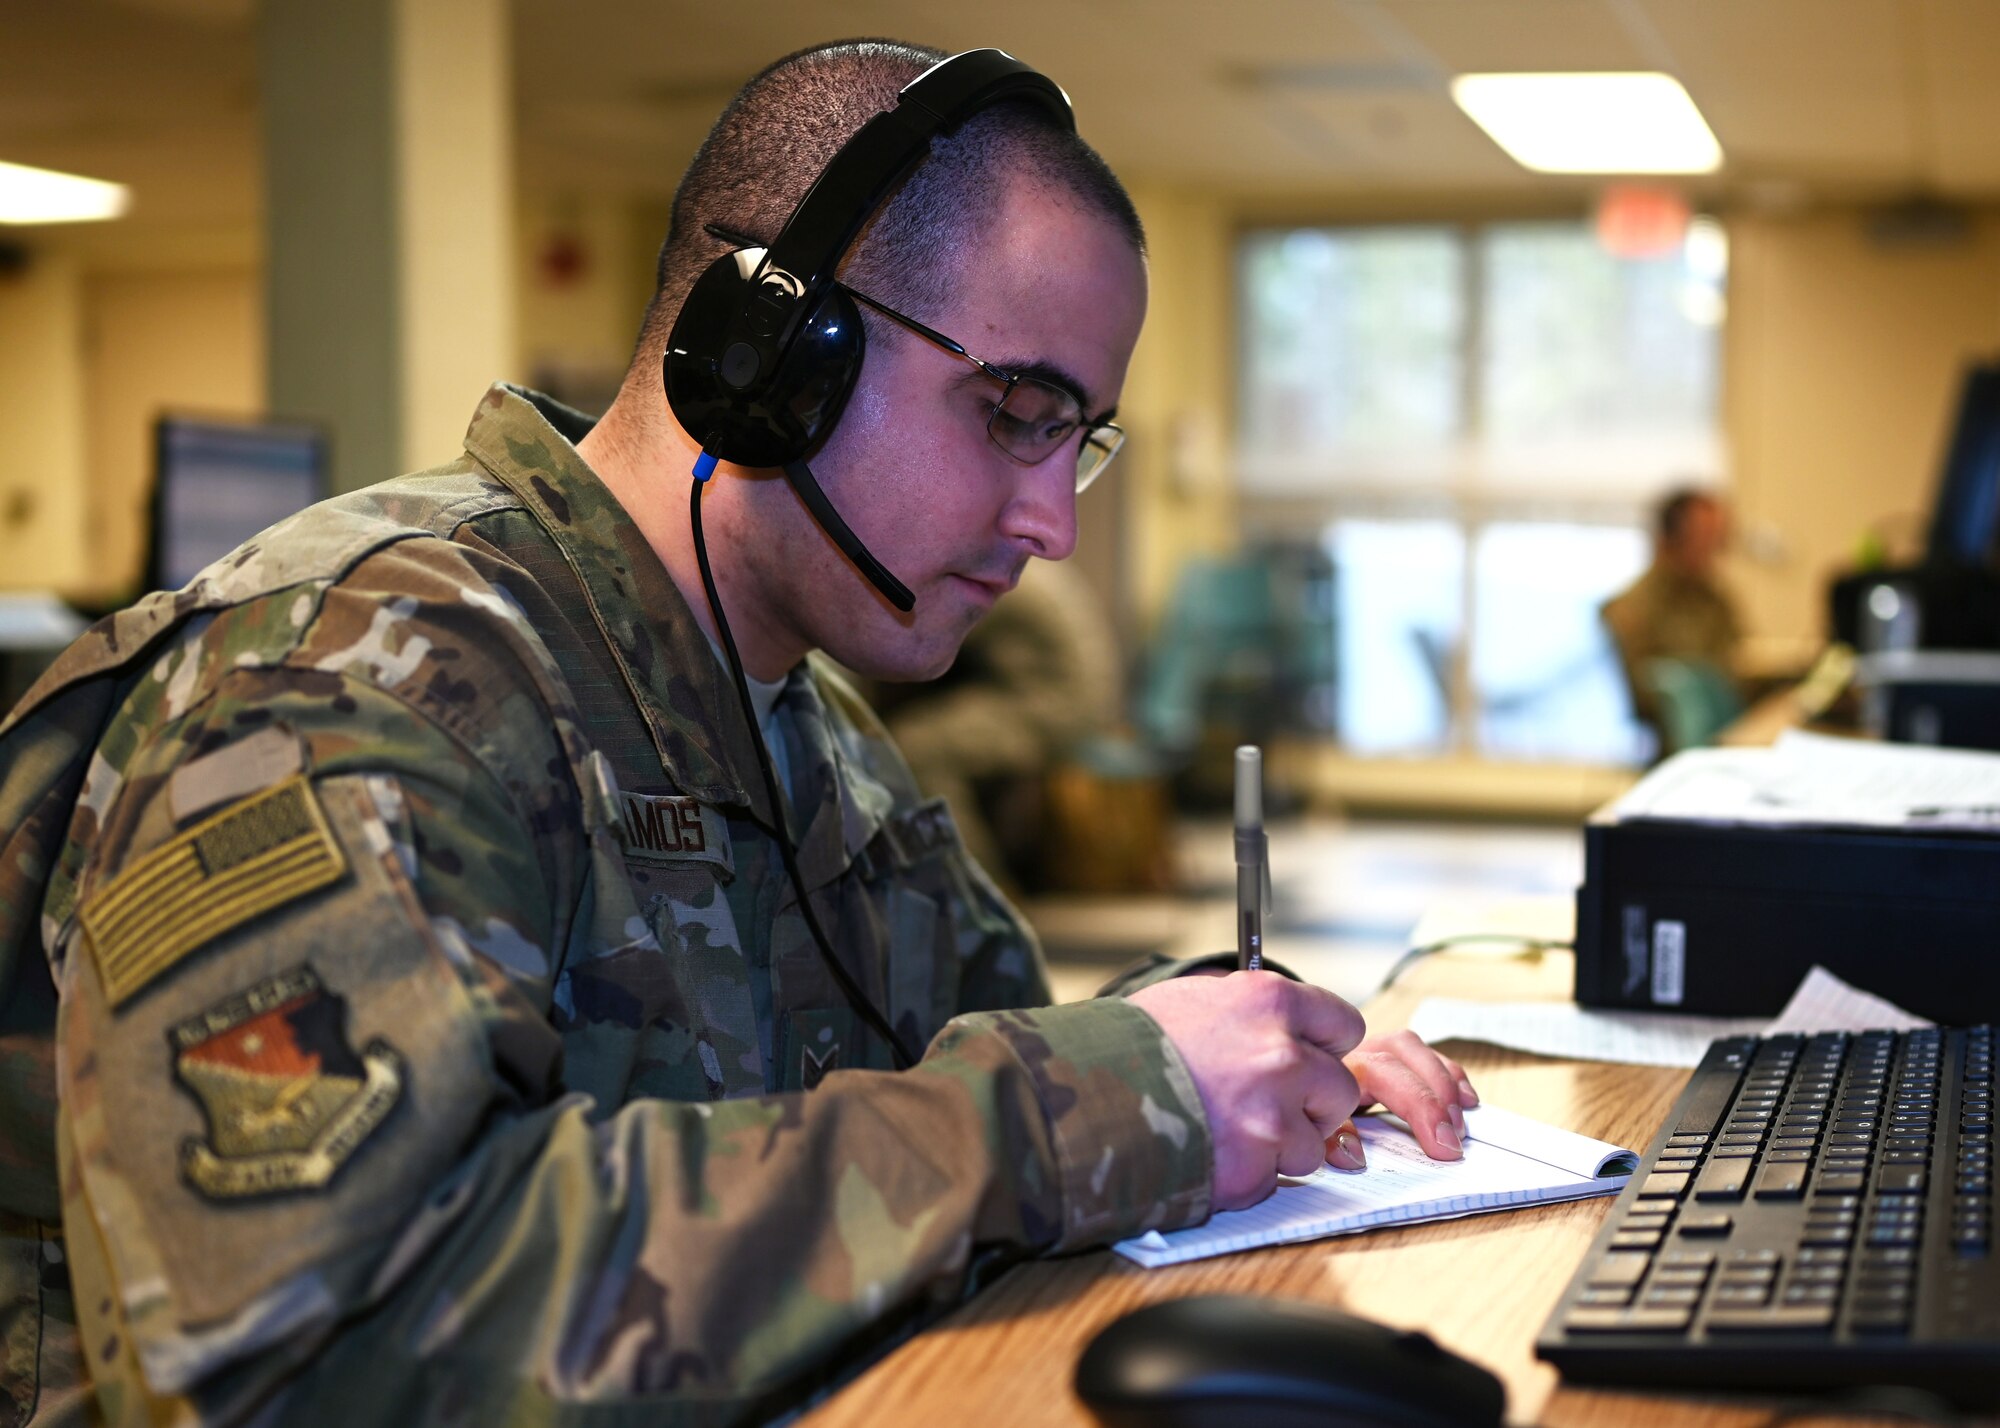 Staff Sgt. Walter Ramos, crew chief, 157th Air Refueling Wing, New Hampshire Air National Guard, fields calls for unemployment benefits at a makeshift call center at the state fire academy in Concord, April 7, 2020.